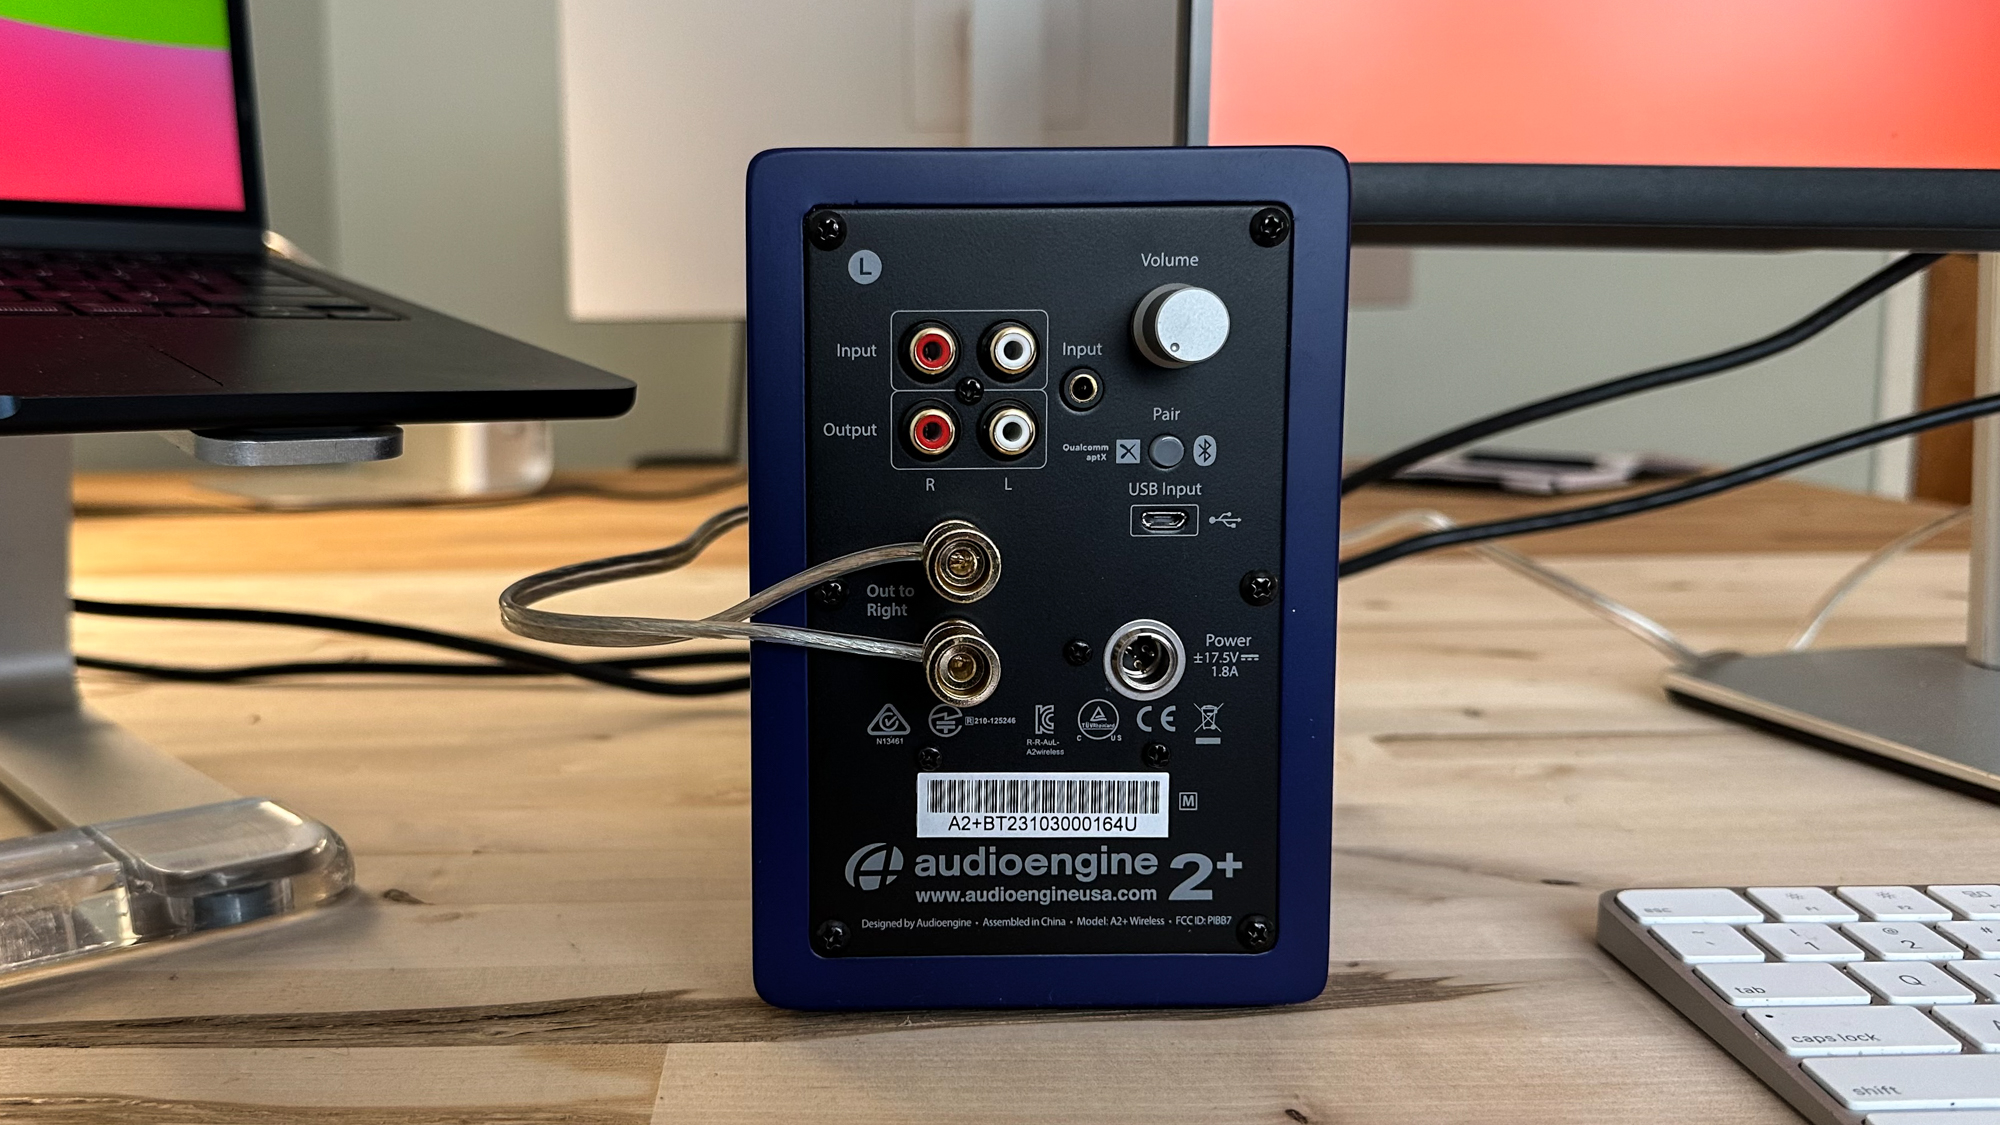 AudioEngine A2+ showing connections on rear of speaker